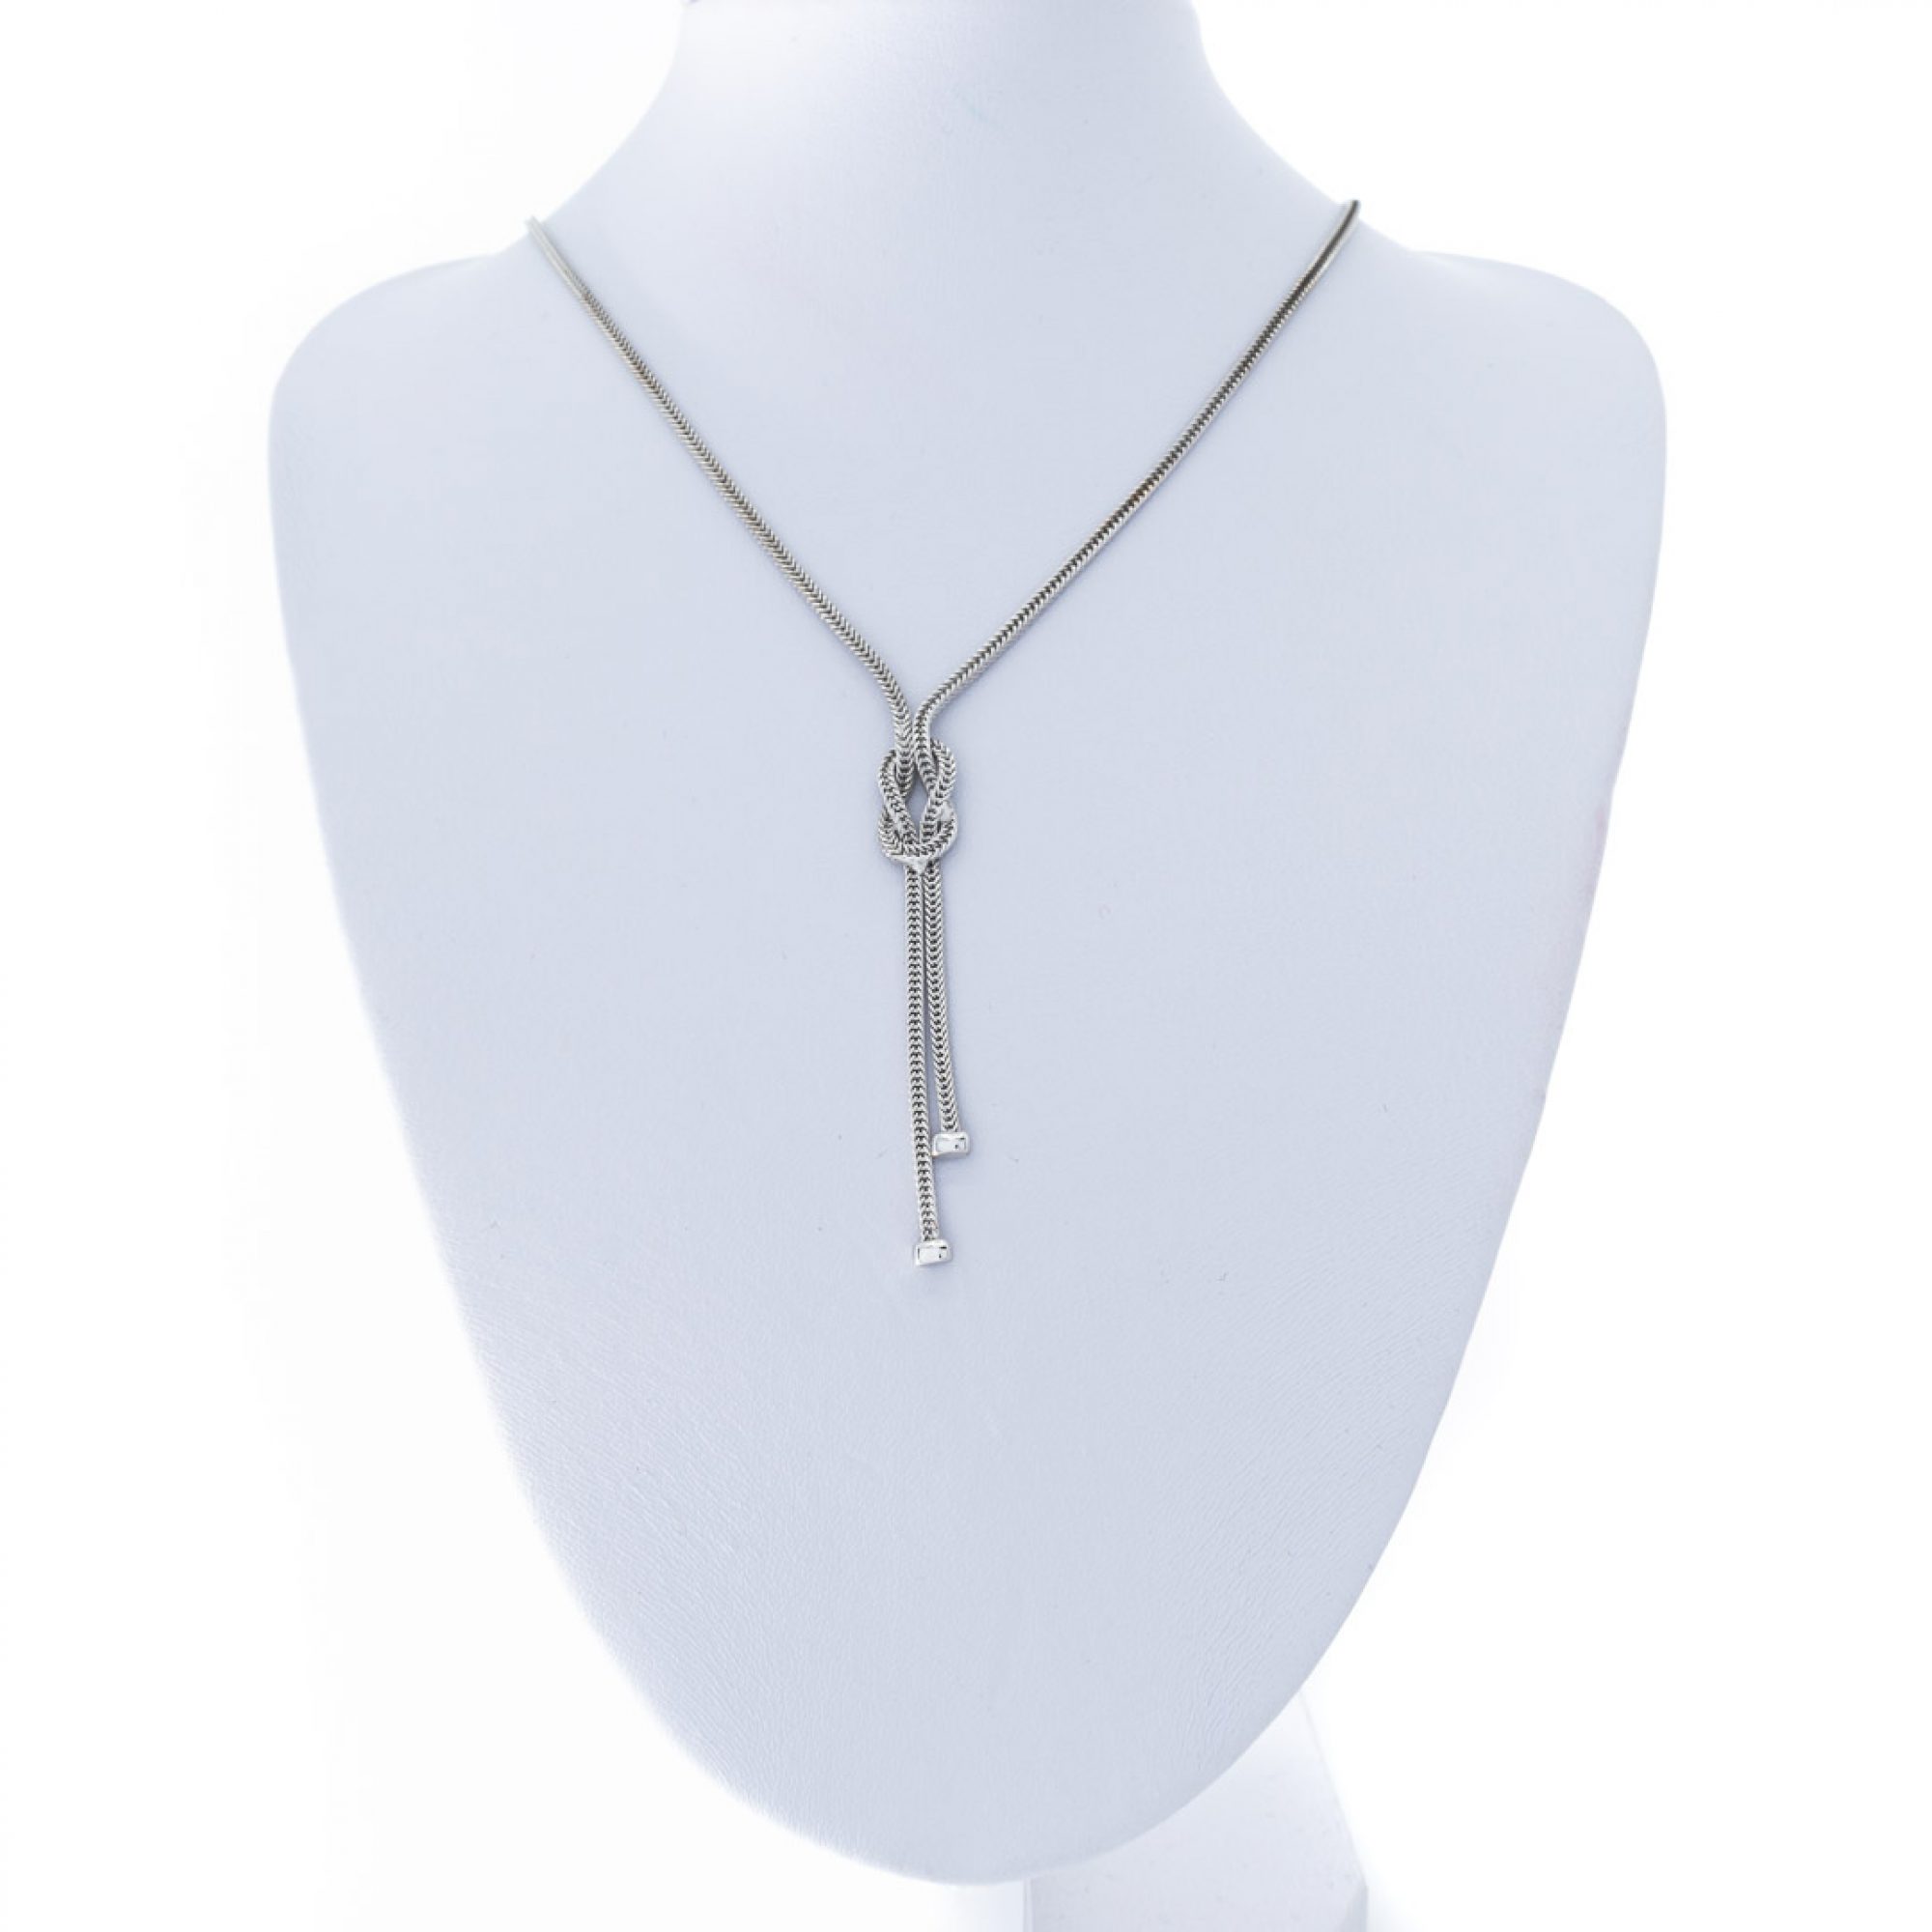 Silver knot necklace 